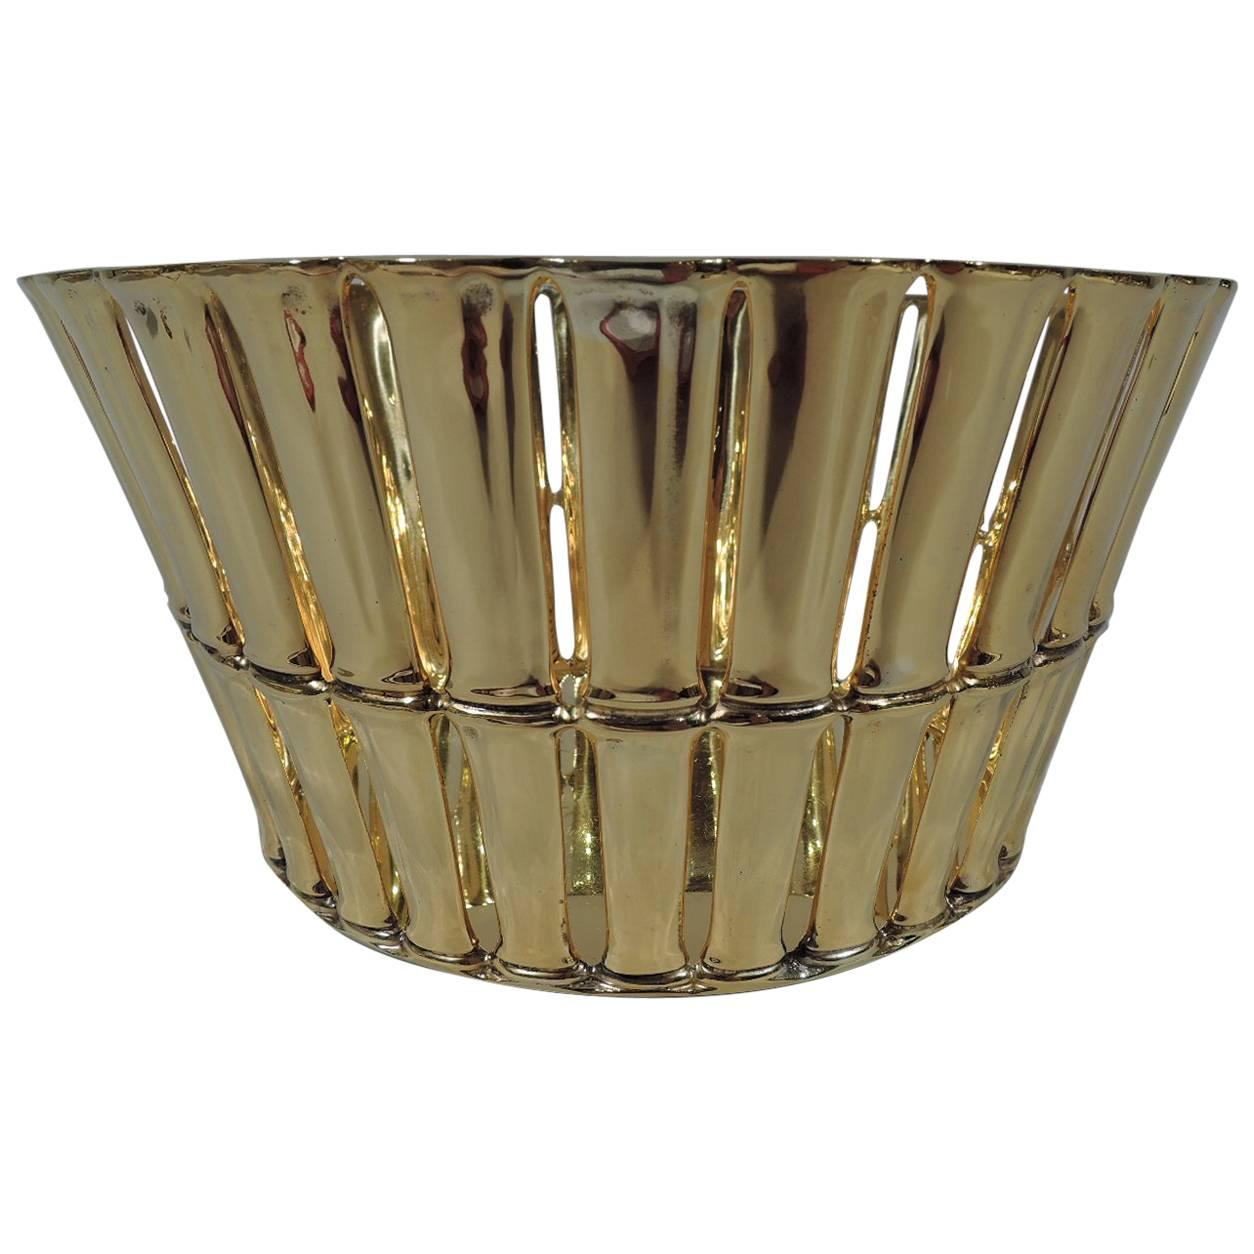 Tiffany Silver Gilt Basket in Desirable Bamboo Pattern